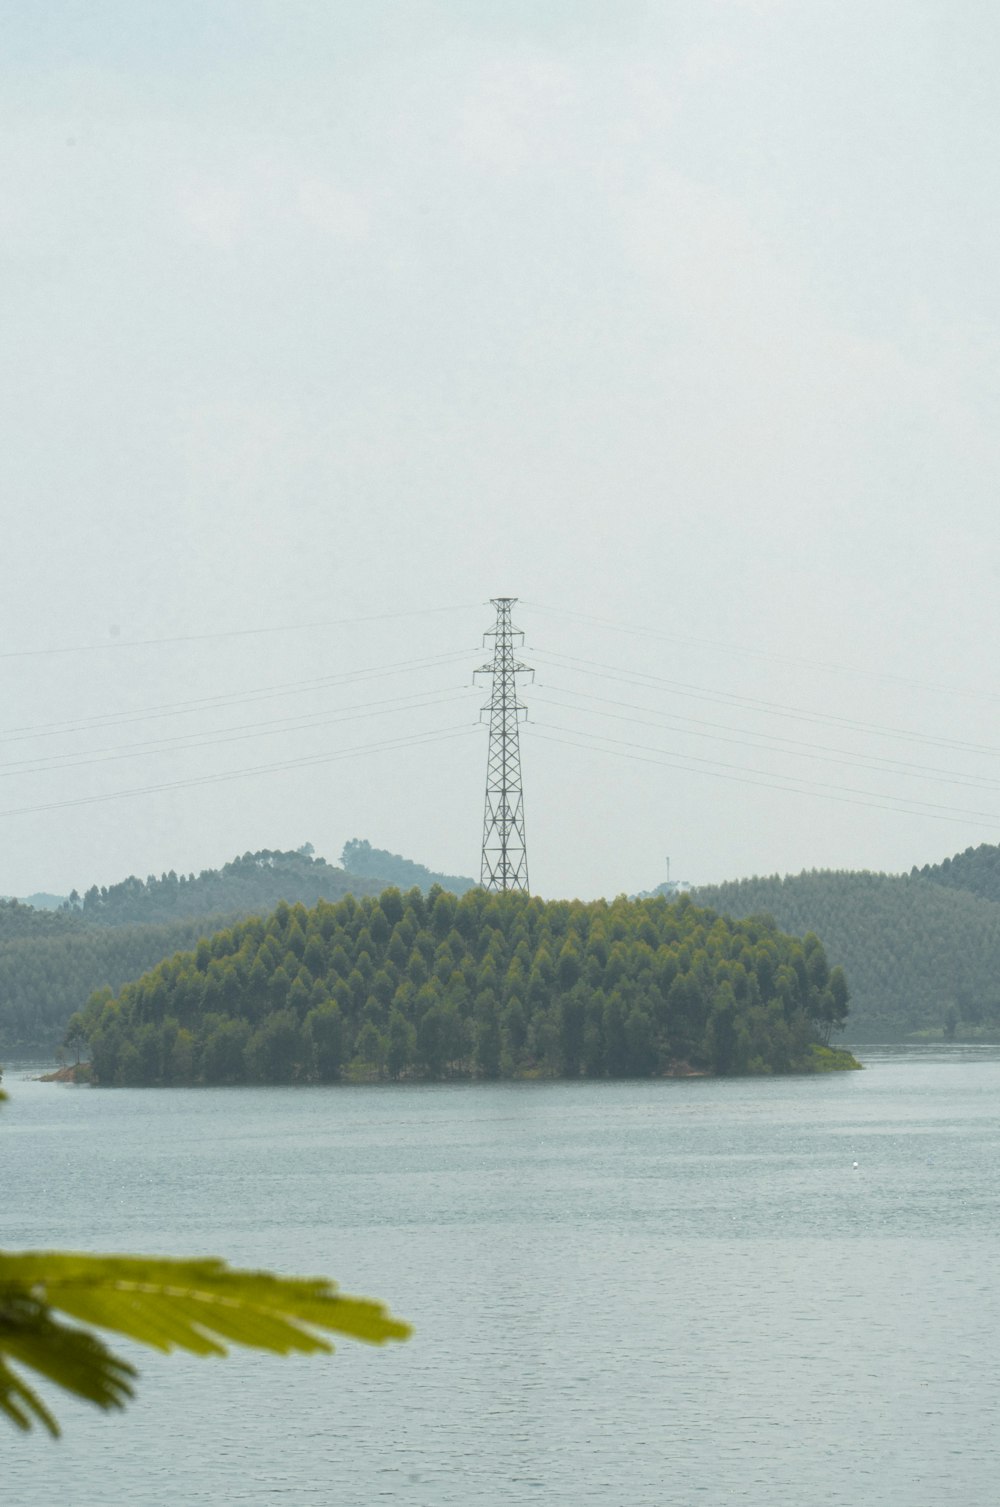 a small island with a tower on it